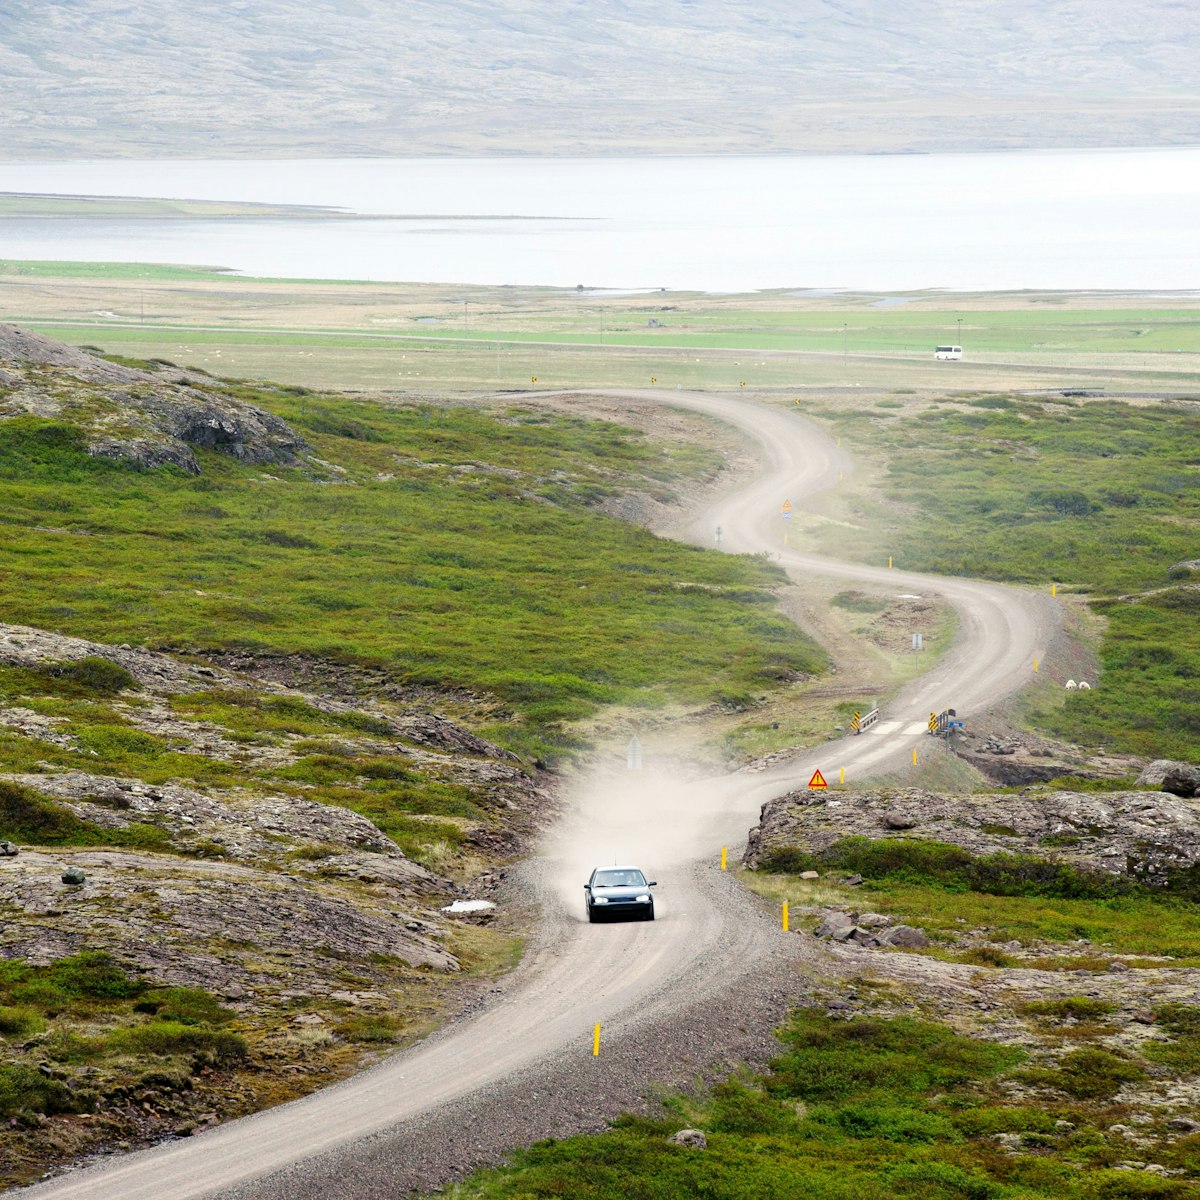 A car on the Öxi mountain pass, Eastern of Iceland - stock photo
Öxi pass is a mountain pass in eastern region, Iceland.